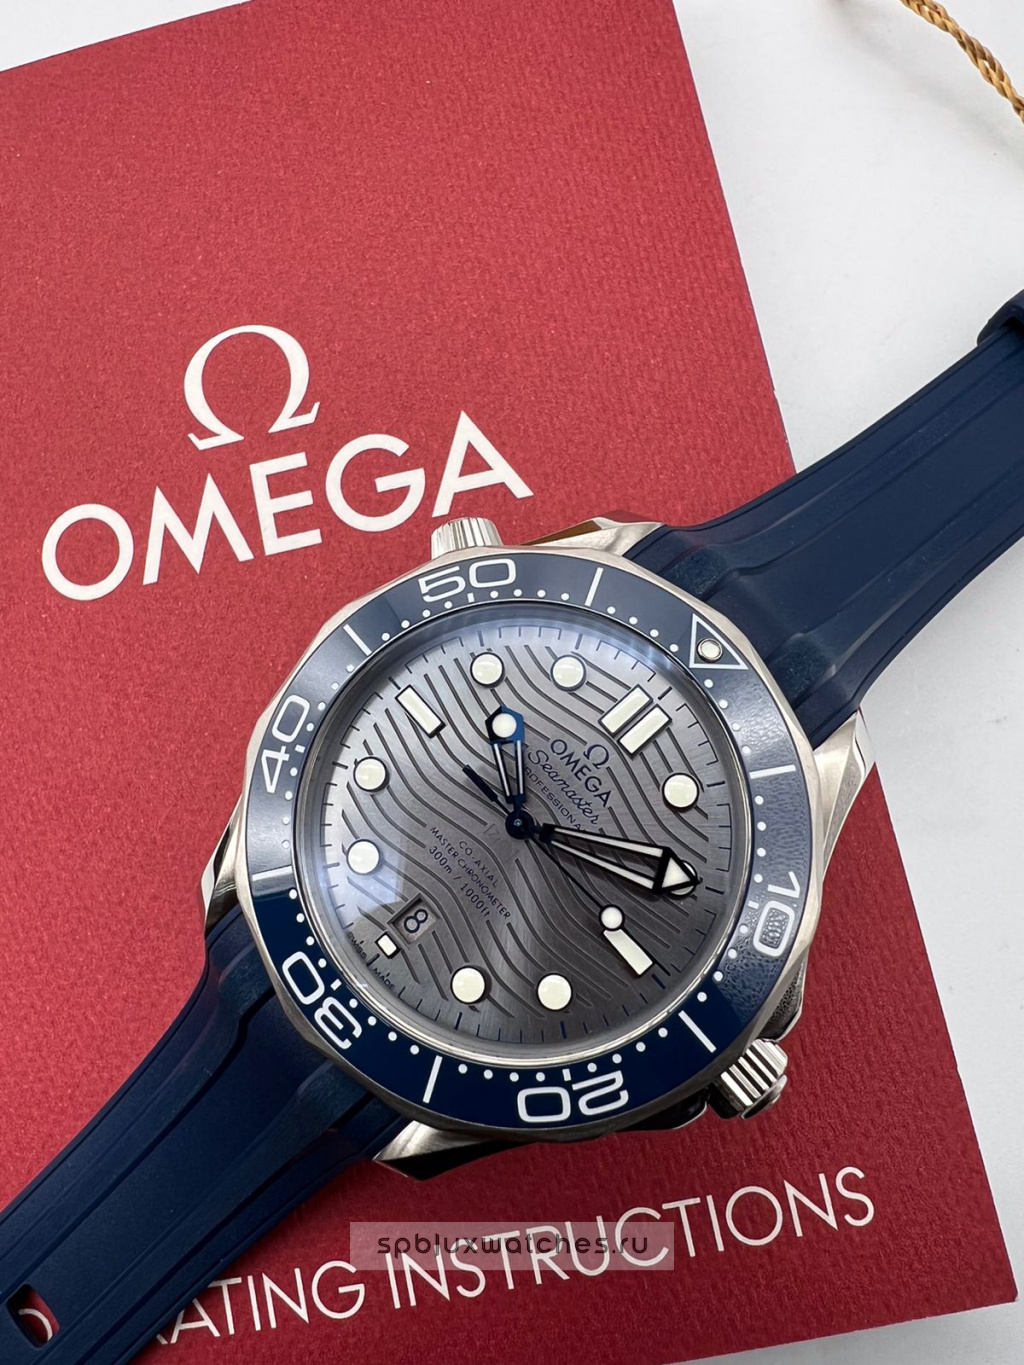 Omega Seamaster Diver 300M Co-Axial Master Chronometer 42 mm 210.32.42.20.06.001